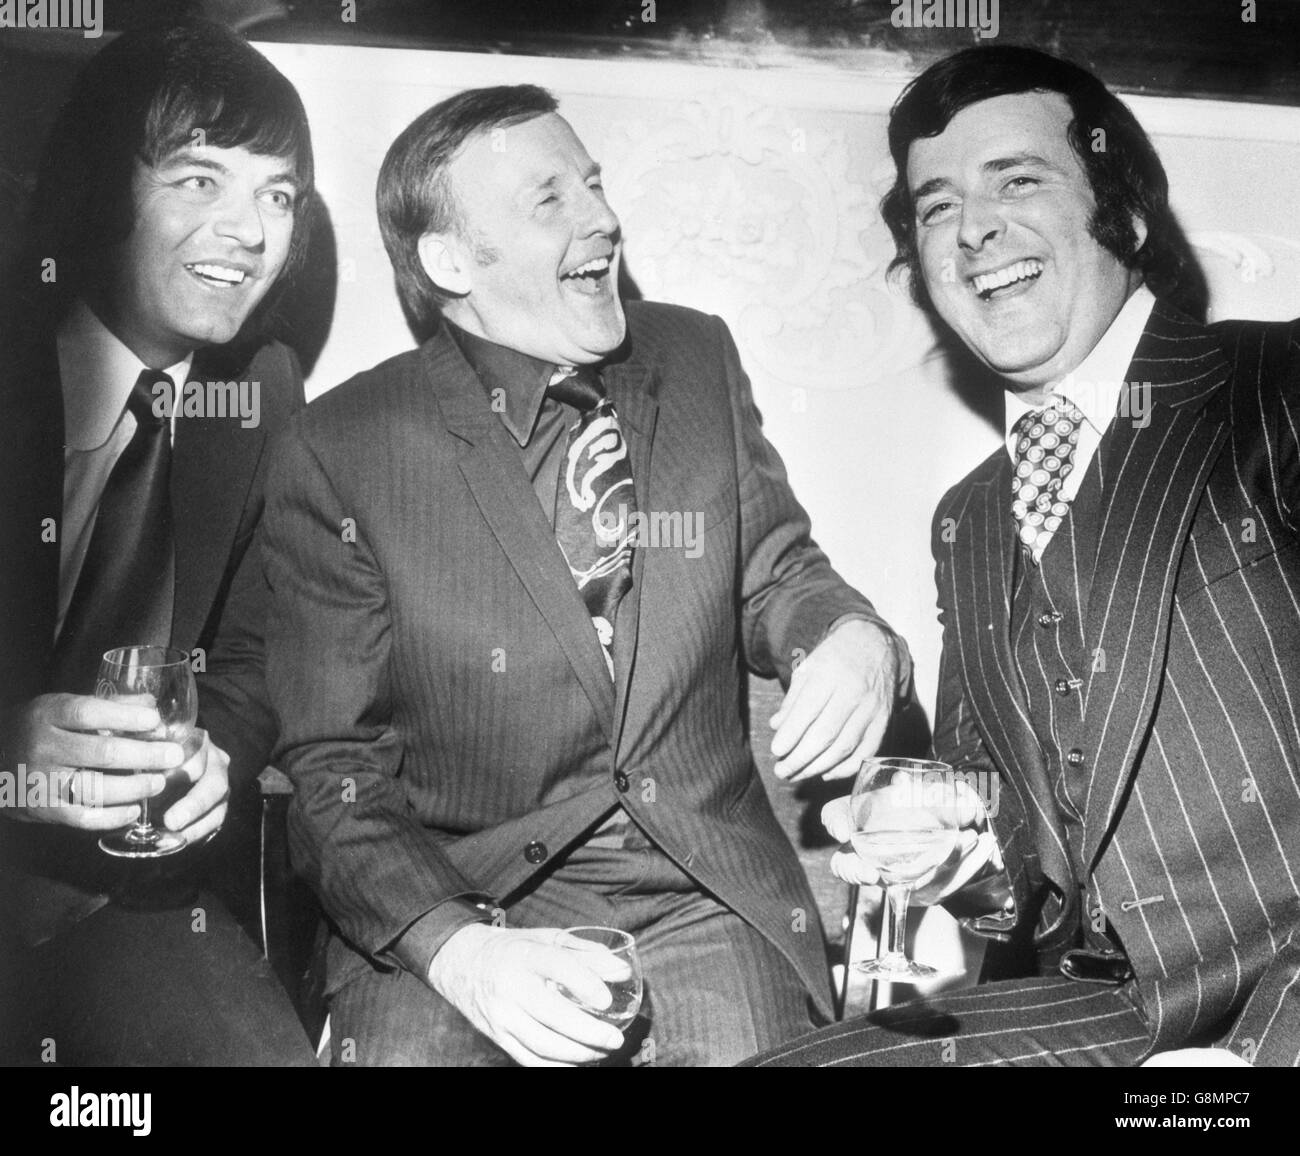 (l-r) Disc jockeys Tony Blackburn, Jimmy Young and Terry Wogan celebrate the BBC's second half-century at the Variety Club of Great Britain's lunch at the Dorchester Hotel in London. Stock Photo